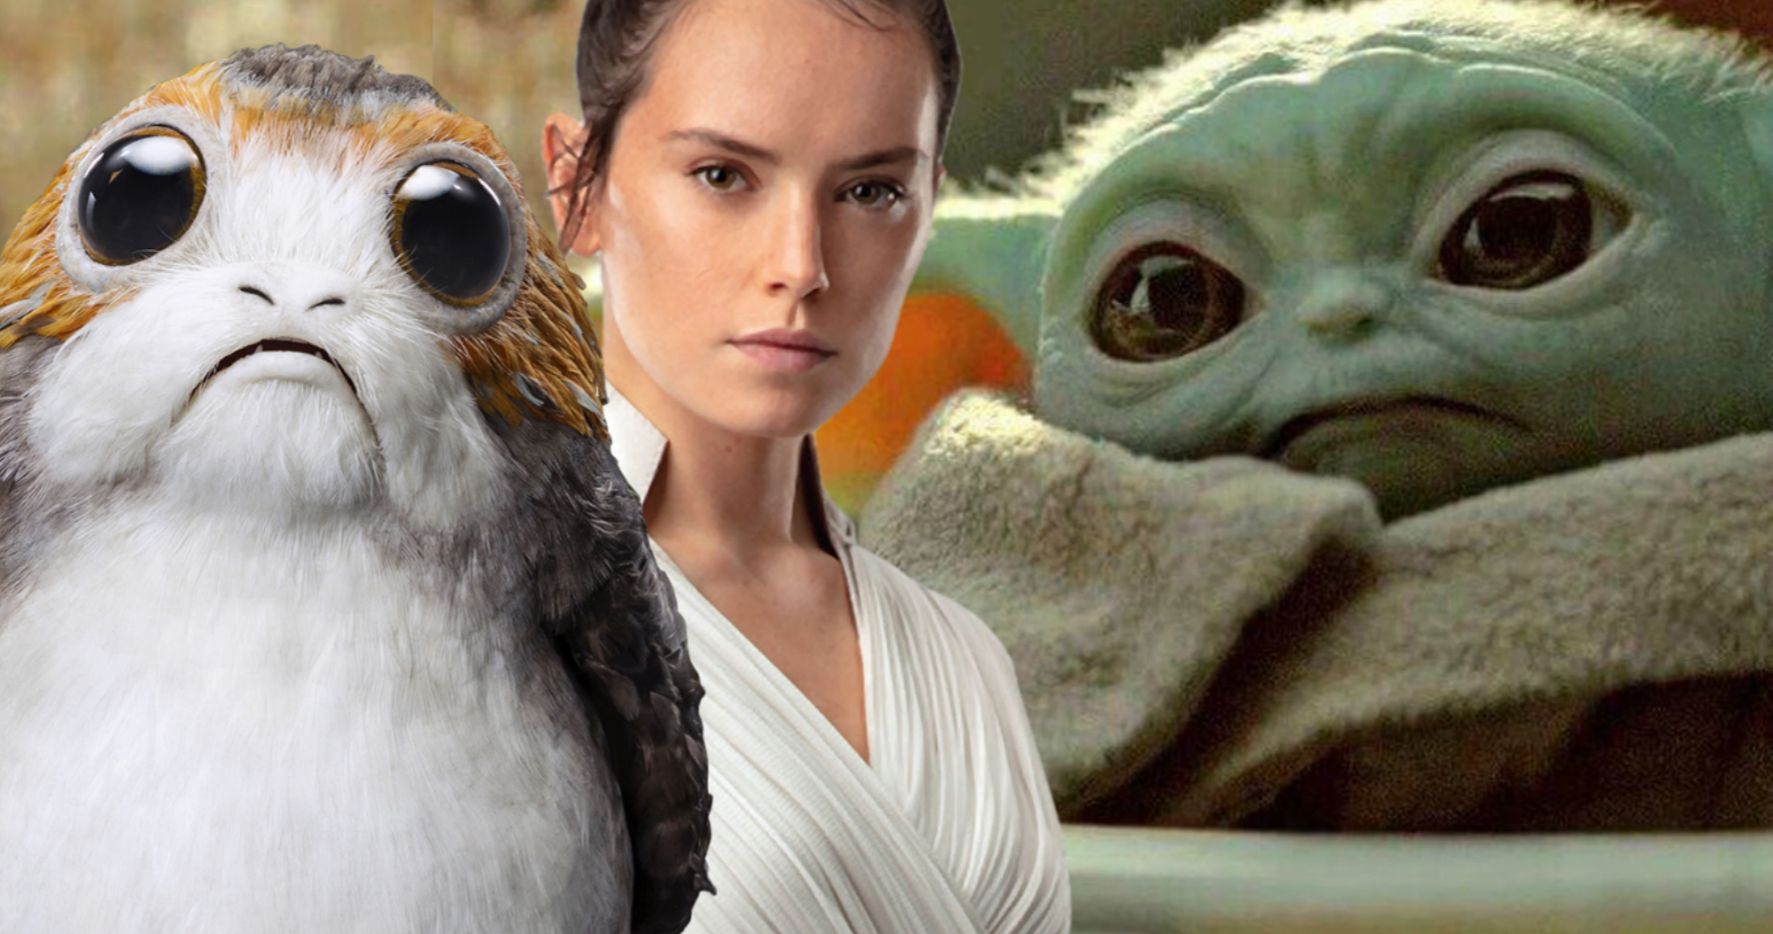 Baby Yoda Vs. Porgs: Daisy Ridley Thinks This Star Wars Debate Is No Contest